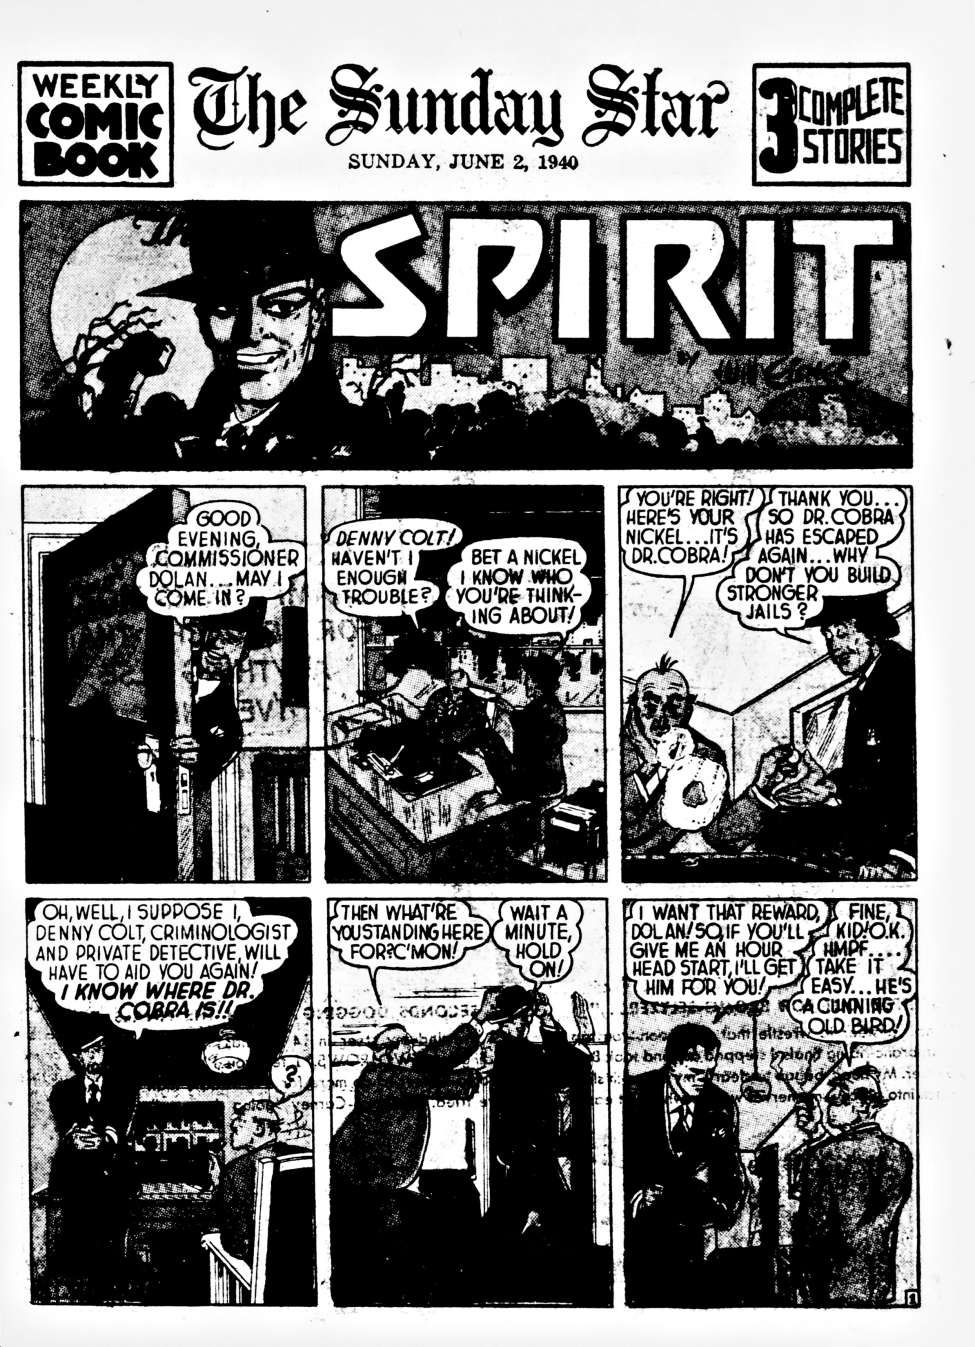 Book Cover For The Spirit (1940-06-02) - Sunday Star (b/w)